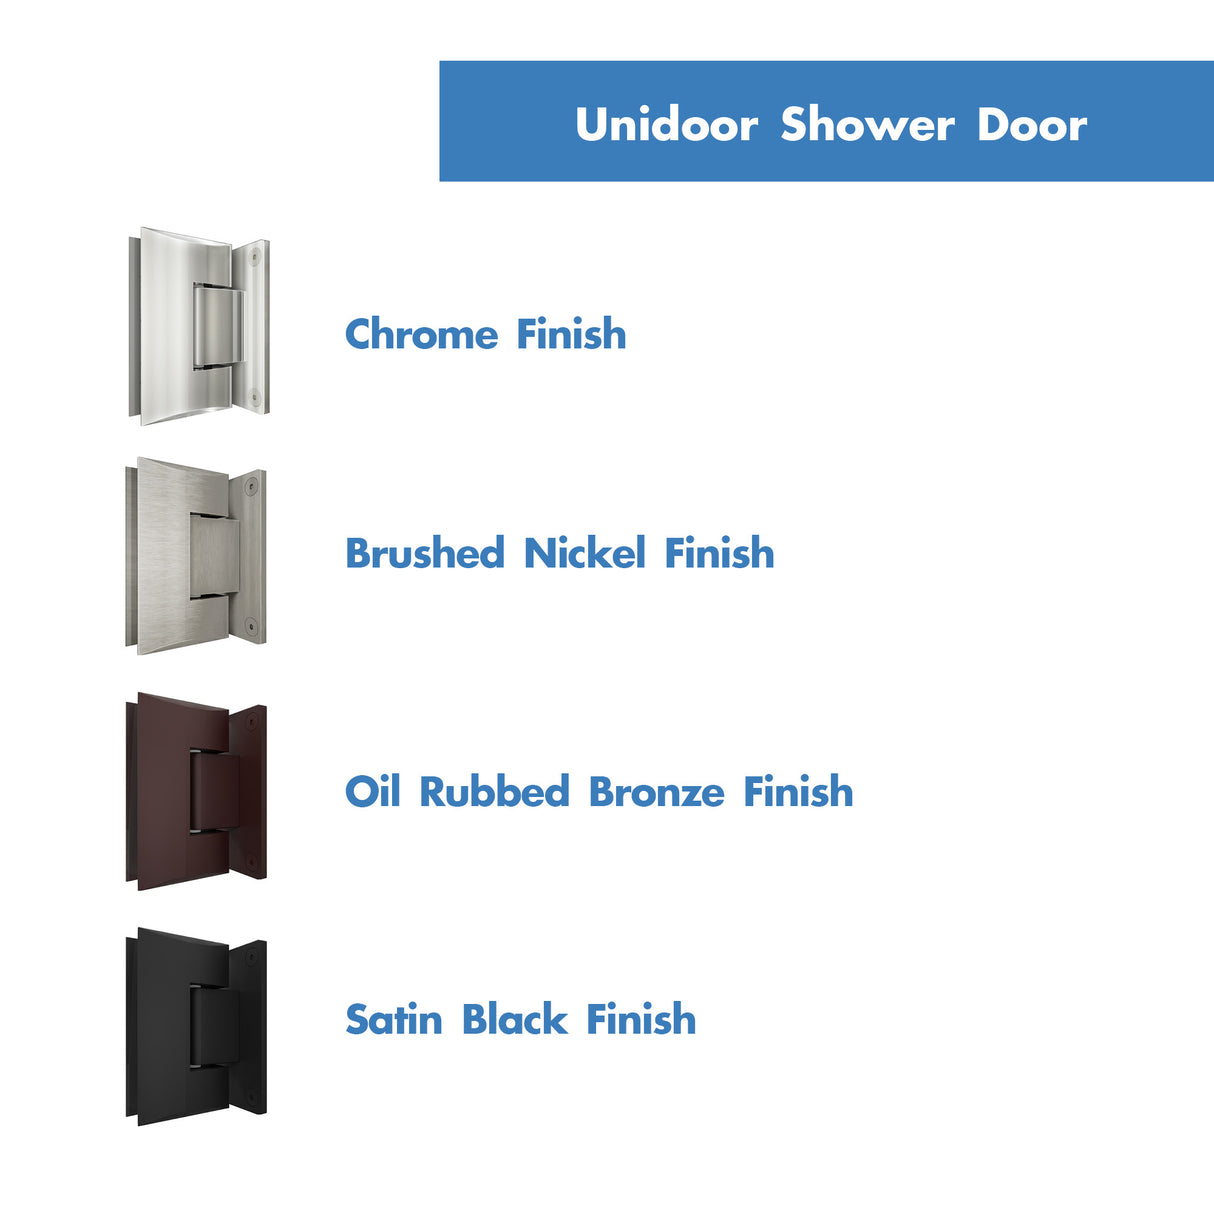 DreamLine Unidoor Plus 34 1/2 in. W x 30 3/8 in. D x 72 in. H Frameless Hinged Shower Enclosure in Chrome